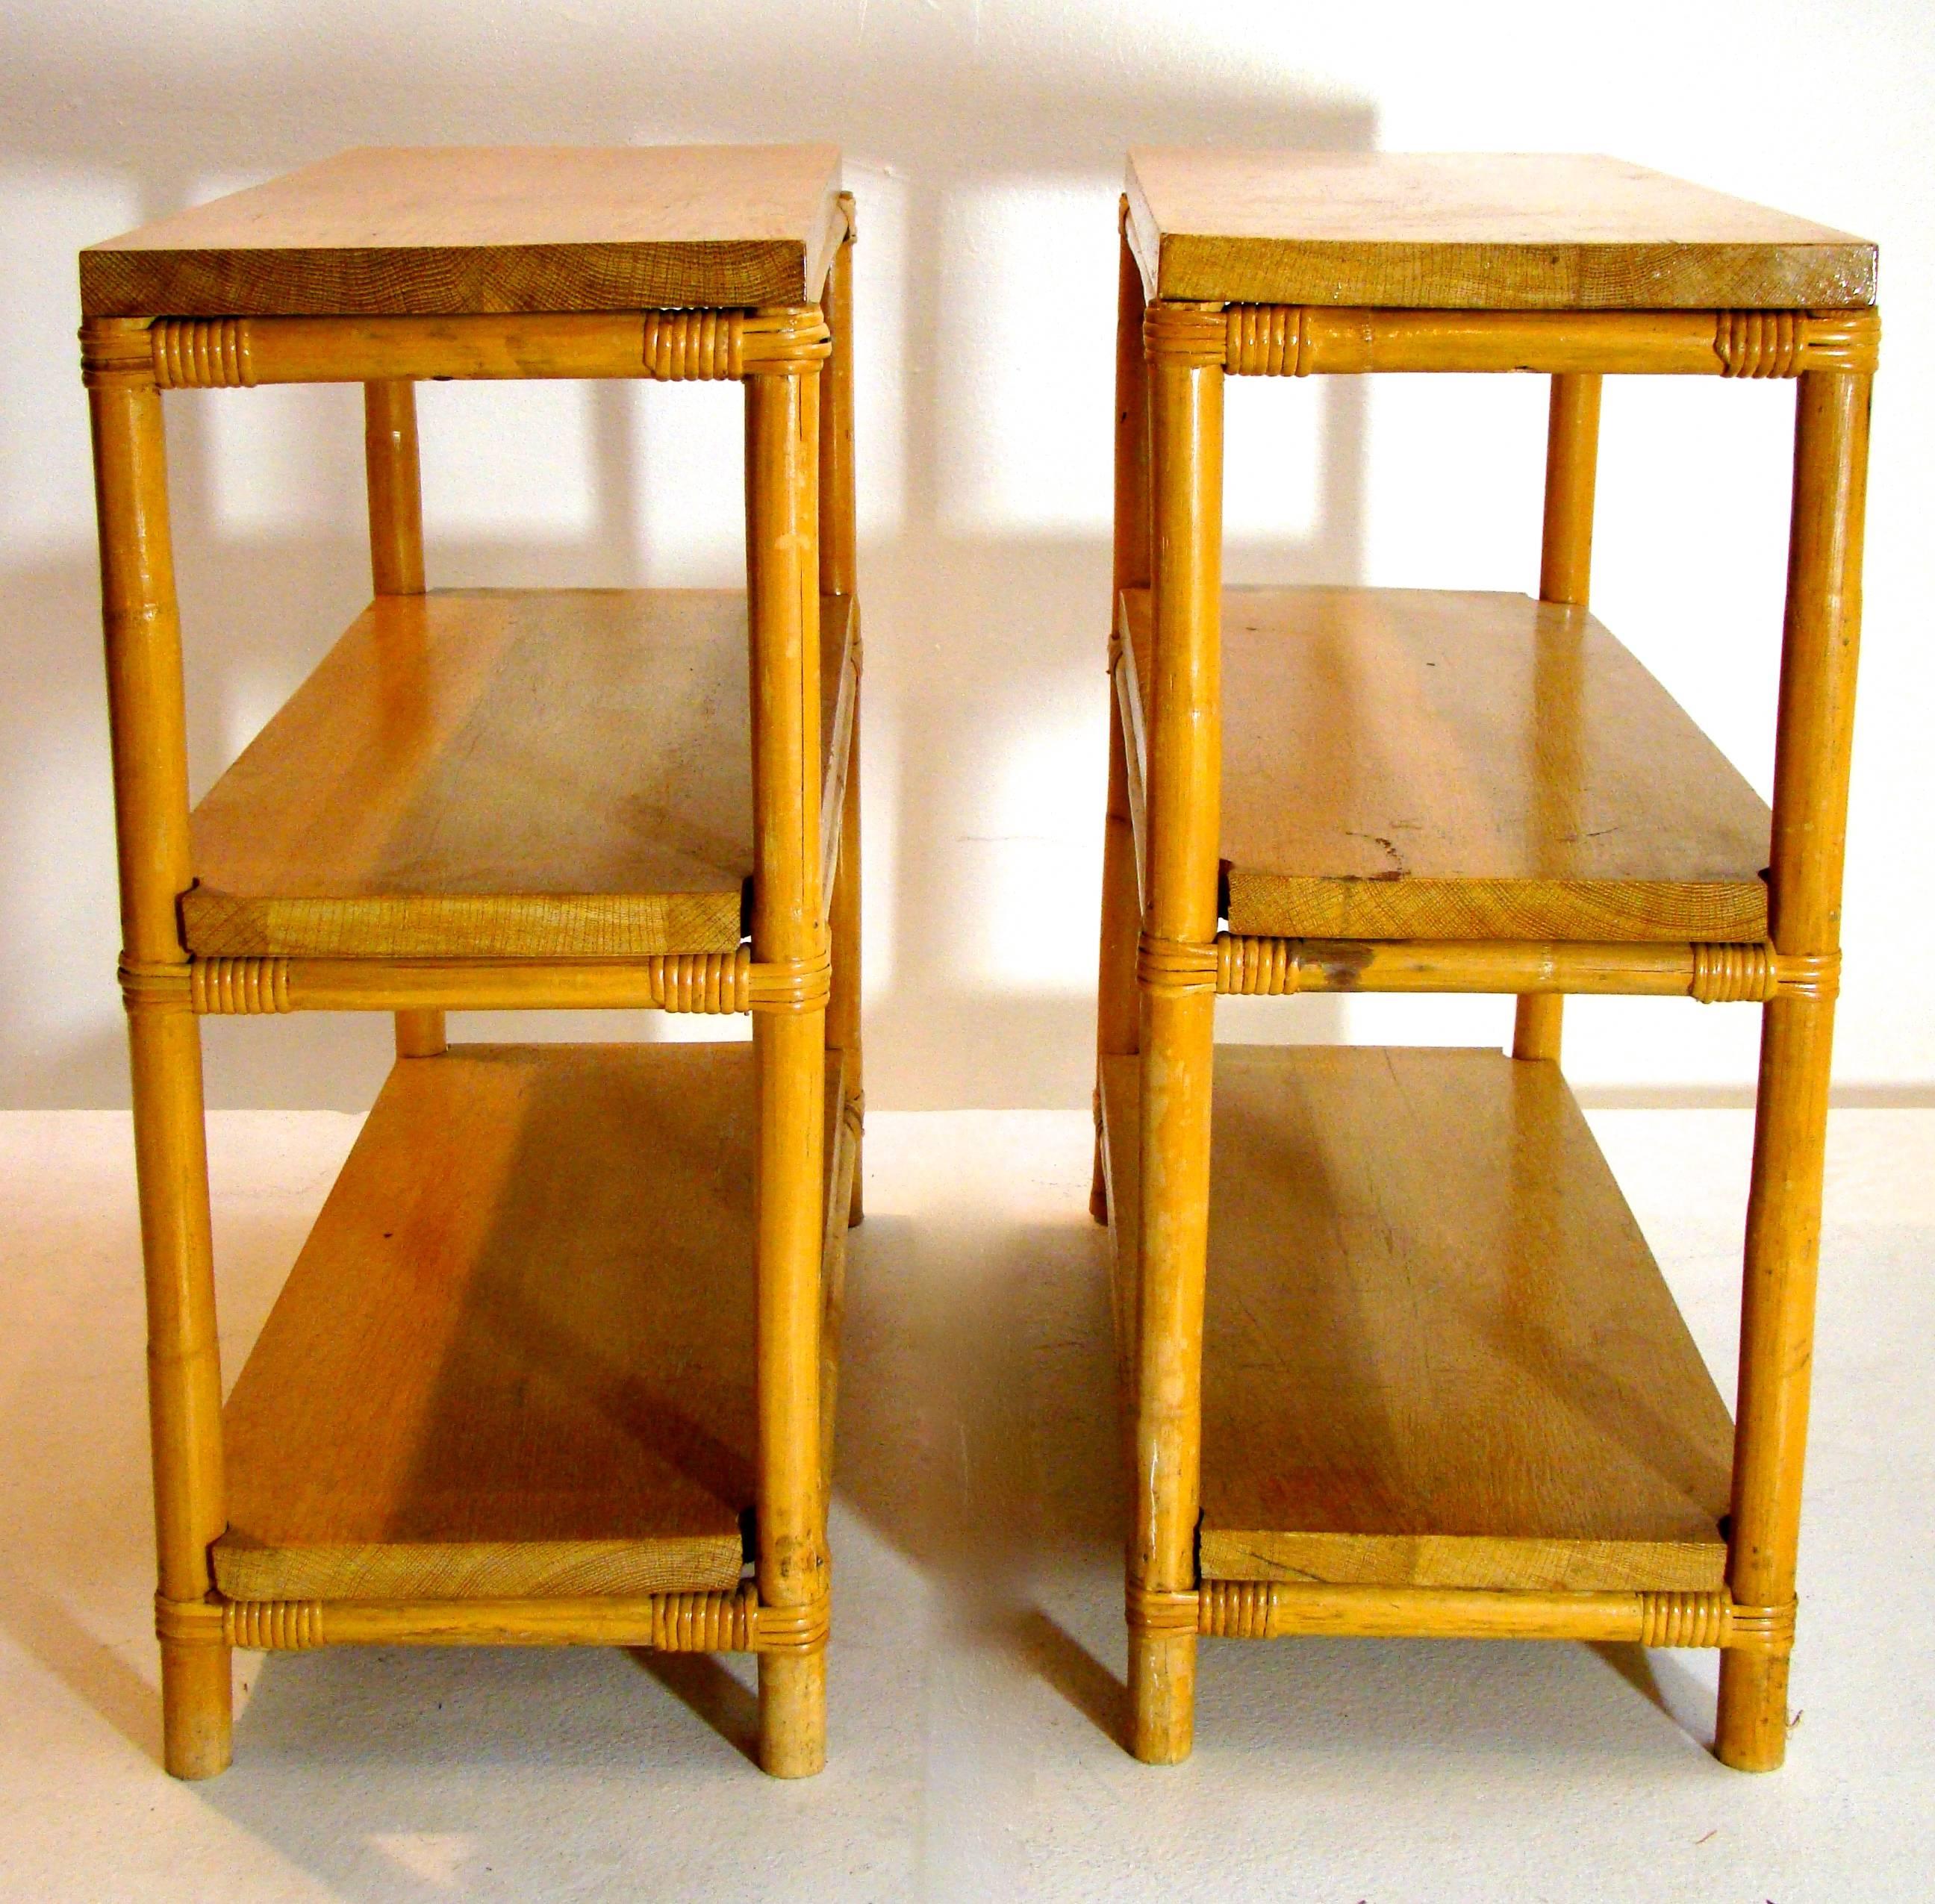 Pair of end tables after Paul Frankl. Entire suite of this furniture is available (see end image). Each piece is listed separately.  We believe these end tables to be Paul Frankl